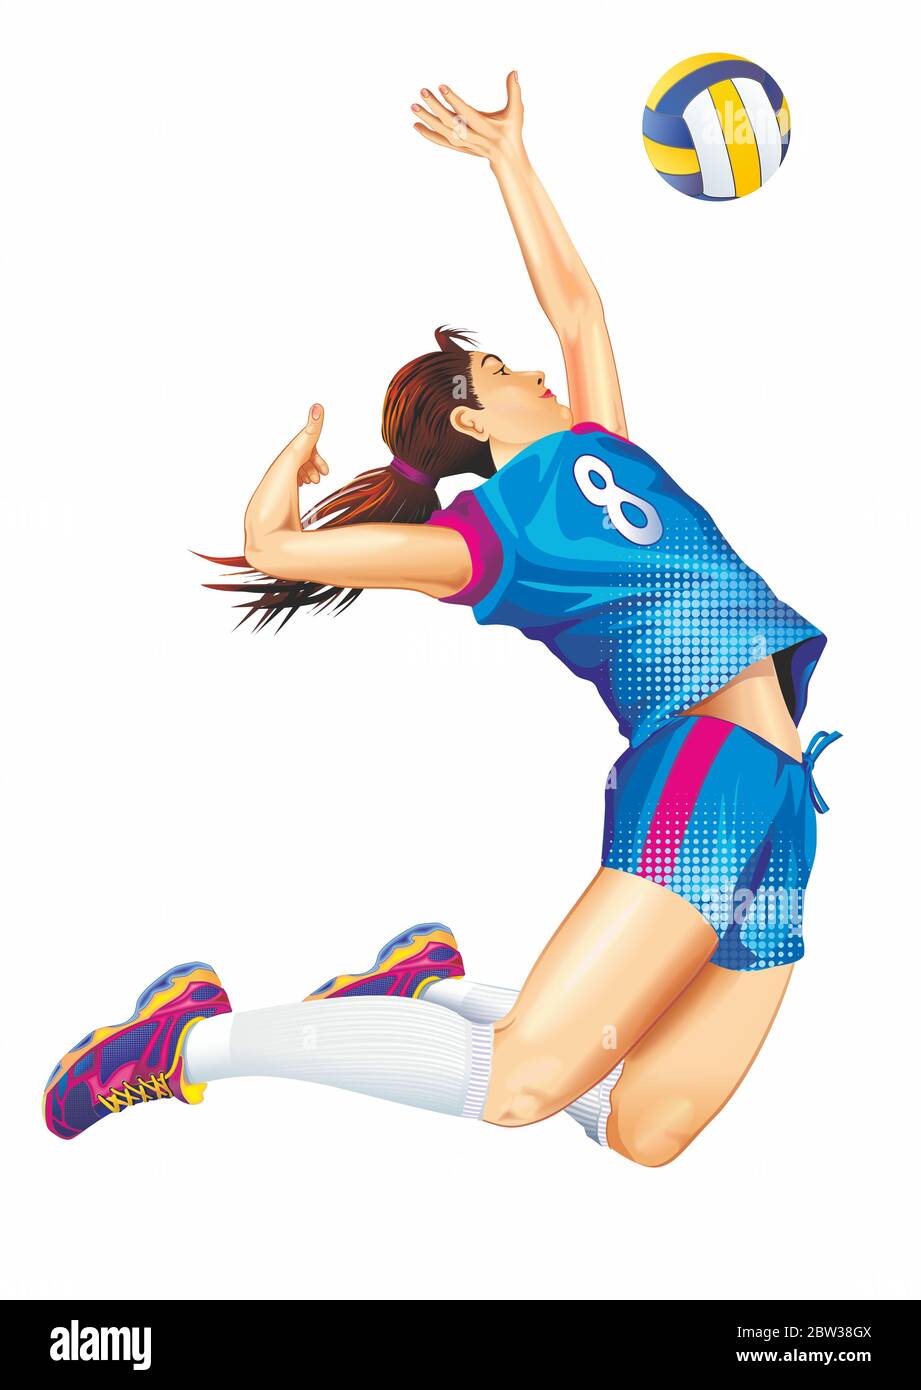 Female Professional Volleyball Player Jump Isolated on White Detailed Illustration. Team Sports Theme. Stock Photo